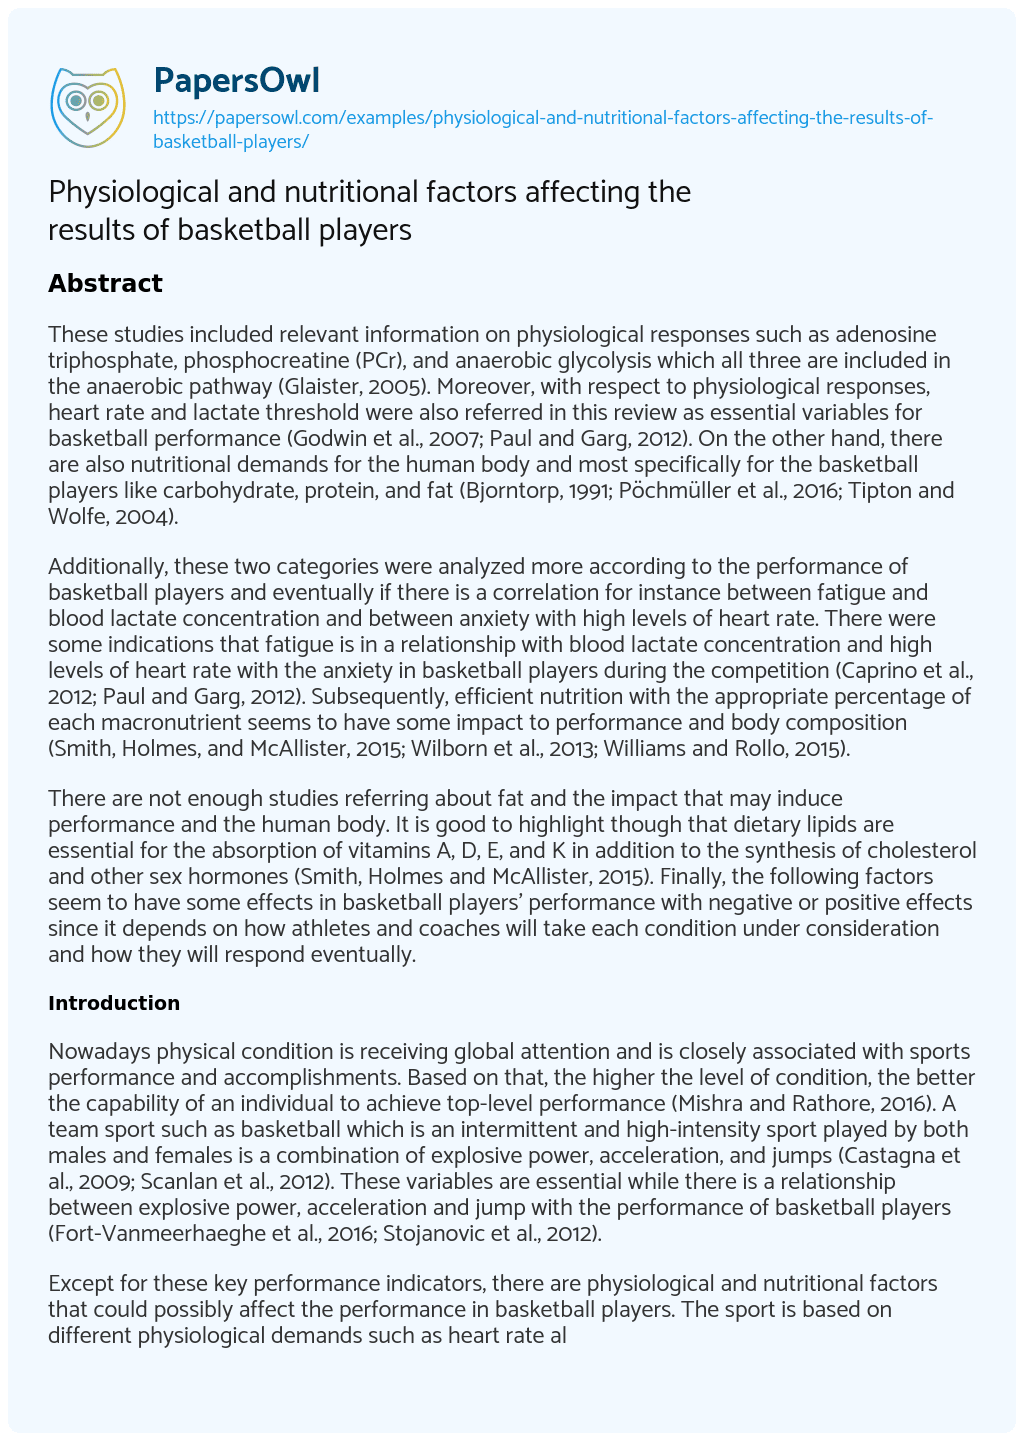 Essay on Physiological and Nutritional Factors Affecting the Results of Basketball Players